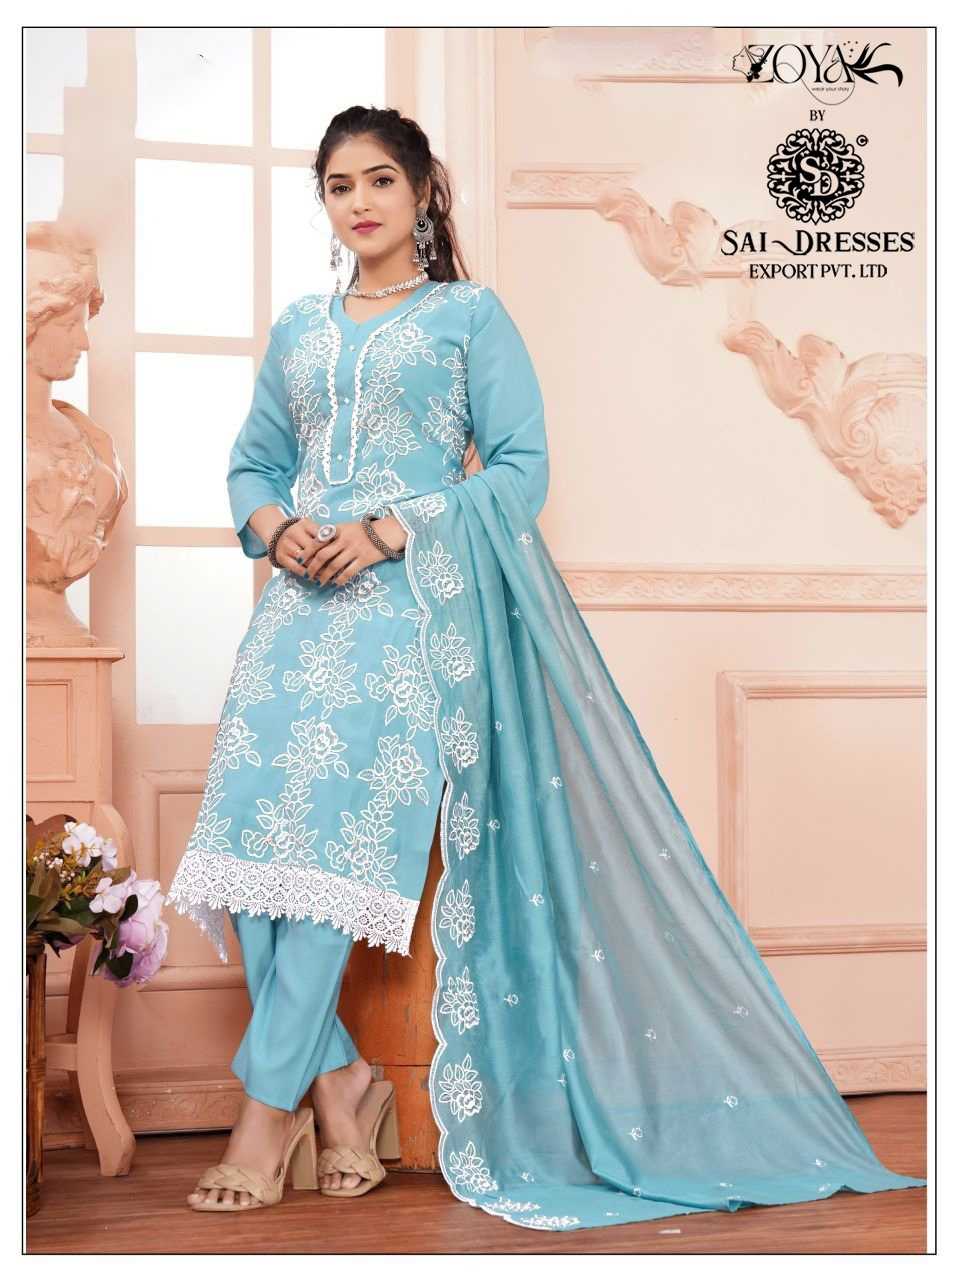 SAI DRESSES PRESENT D.NO 1769 READY TO FESTIVE WEAR STRAIGHT CUT WITH PANT STYLE DESIGNER 3 PIECE COMBO SUITS IN WHOLESALE RATE  IN SURAT